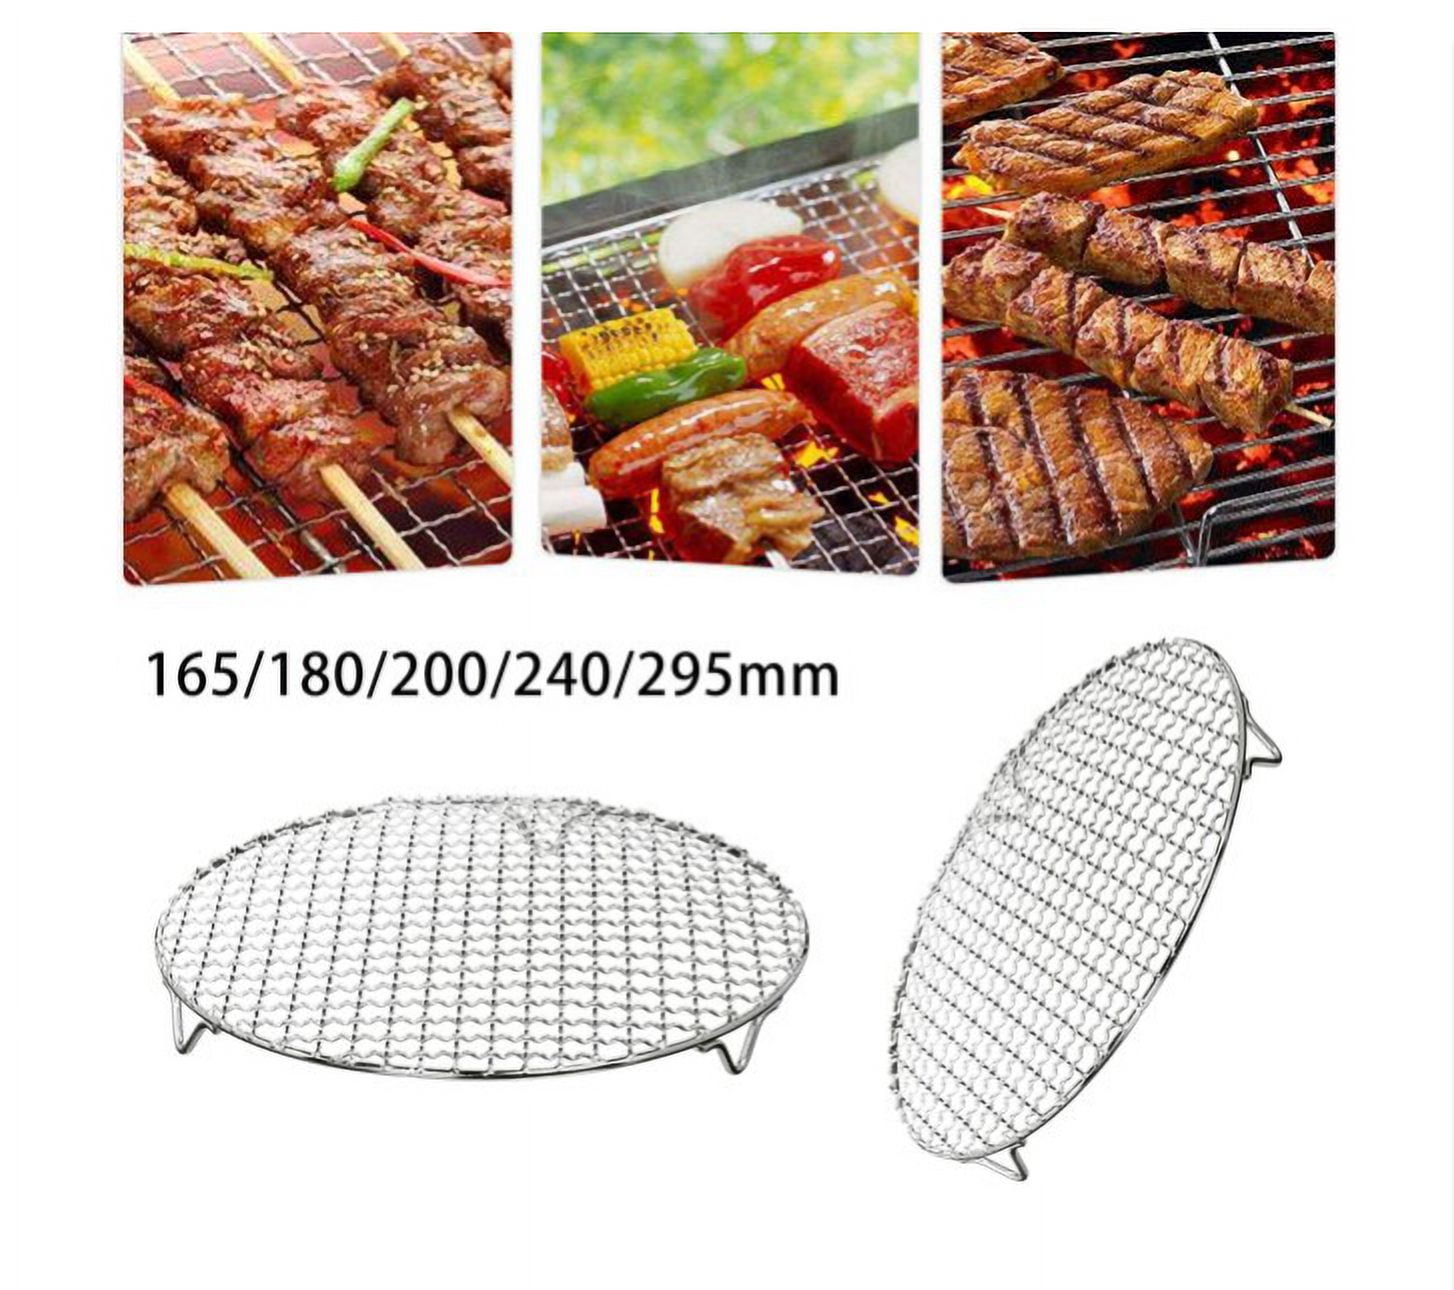 100% Stainless Steel Roasting & Cooling Rack, Sheet Oven-Safe Baking Tray  with Multiple Welds, Thick Wire Grid, Oven & Grill Safe,30x23x1.5cm 